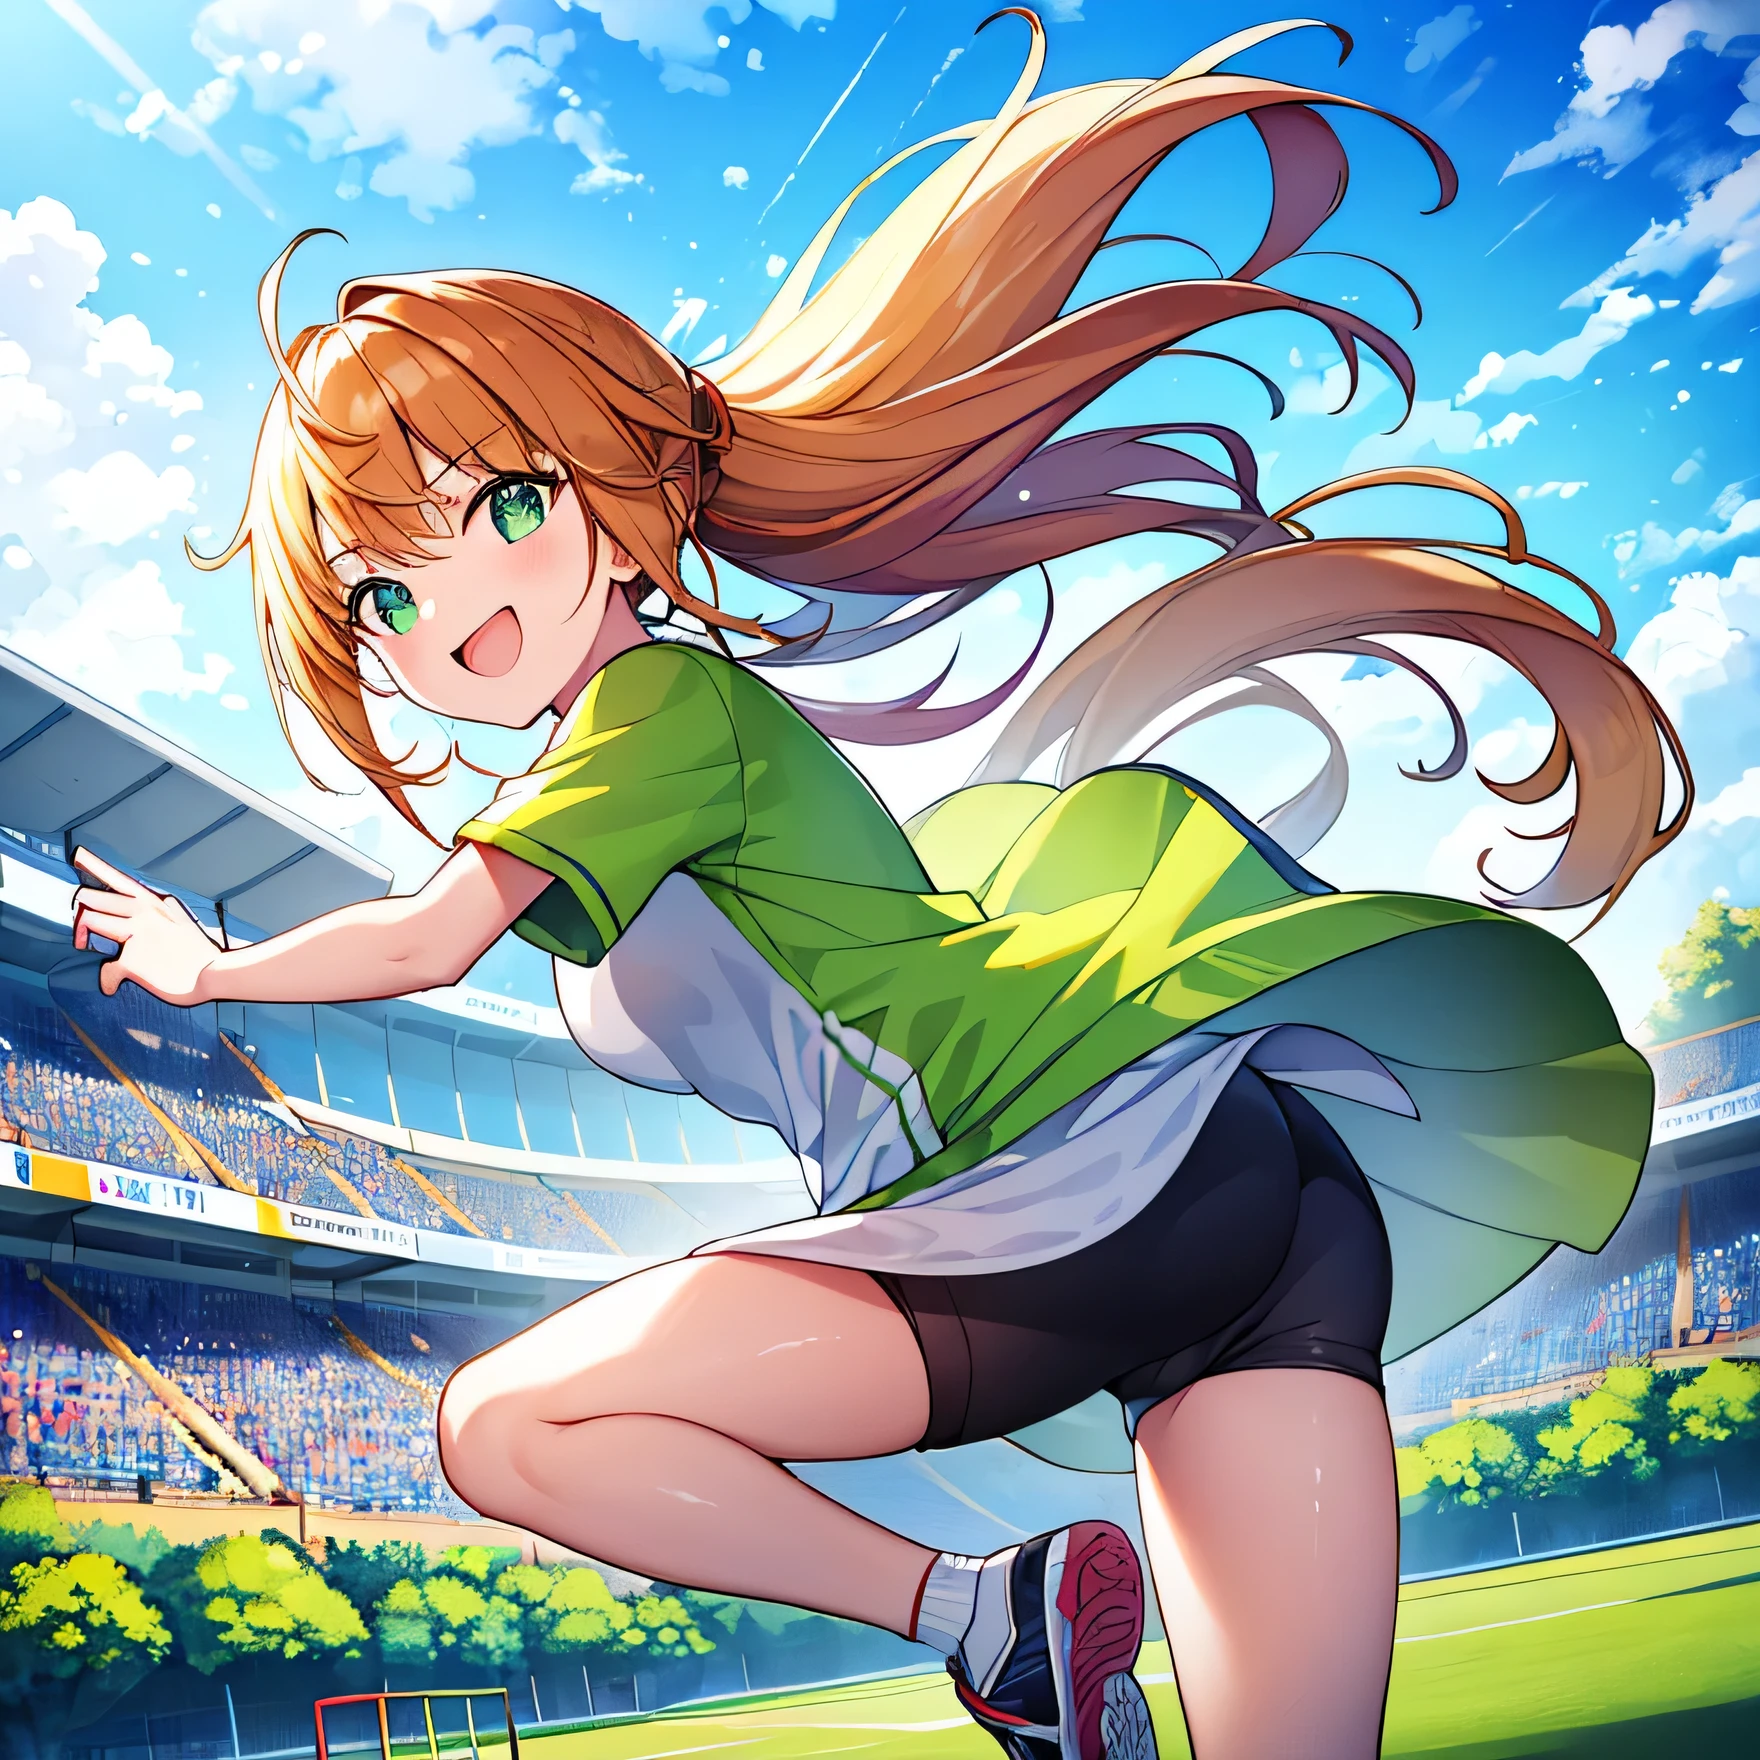 (handsome boy) Jump to play badminton, (girl) Standing to the side while watching the game, (Outdoor) scene, (green々Fresh green grass) At their feet, (Bright sunny day) With a clear green sky, (Energetic and dynamic) atmosphere, (Vibrant colors) Emphasize exercise, (Beautiful detailed expression) Boy and girl, (Focused Intensity) In their eyes, (Recreational Sports) atmosphere, (highest quality, High resolution) Image captured (Fast-paced action) Gaming, (Natural light) creating a vibrant and lively scene, (like々New Happiness) It&#39;s shown in their smiles, (sporty clothes) Strengthen your active personality, (Multi-directional shadows) Shows the direction of sunlight, (fascinating composition) Showcasing athletic skills and fun.Background is white